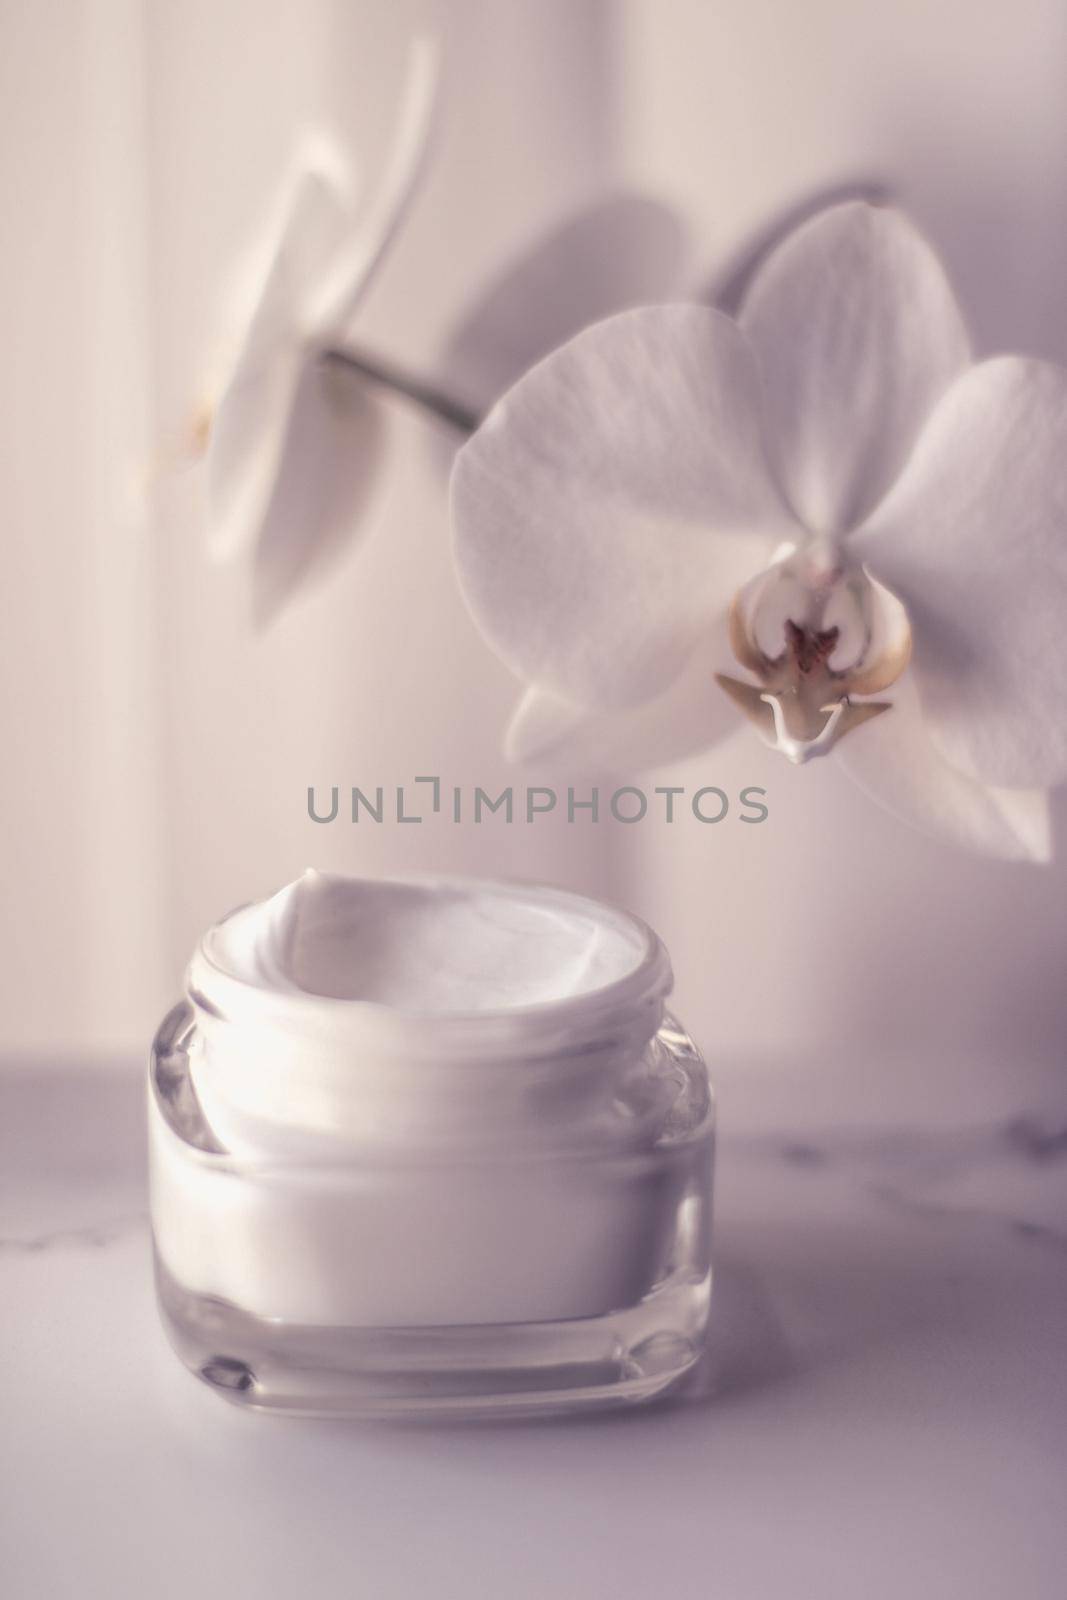 Cosmetic branding, toiletries and spf concept - Face cream moisturizer jar and orchid flower, moisturizing skin care lotion and lifting emulsion, anti-age cosmetics for luxury beauty skincare brand